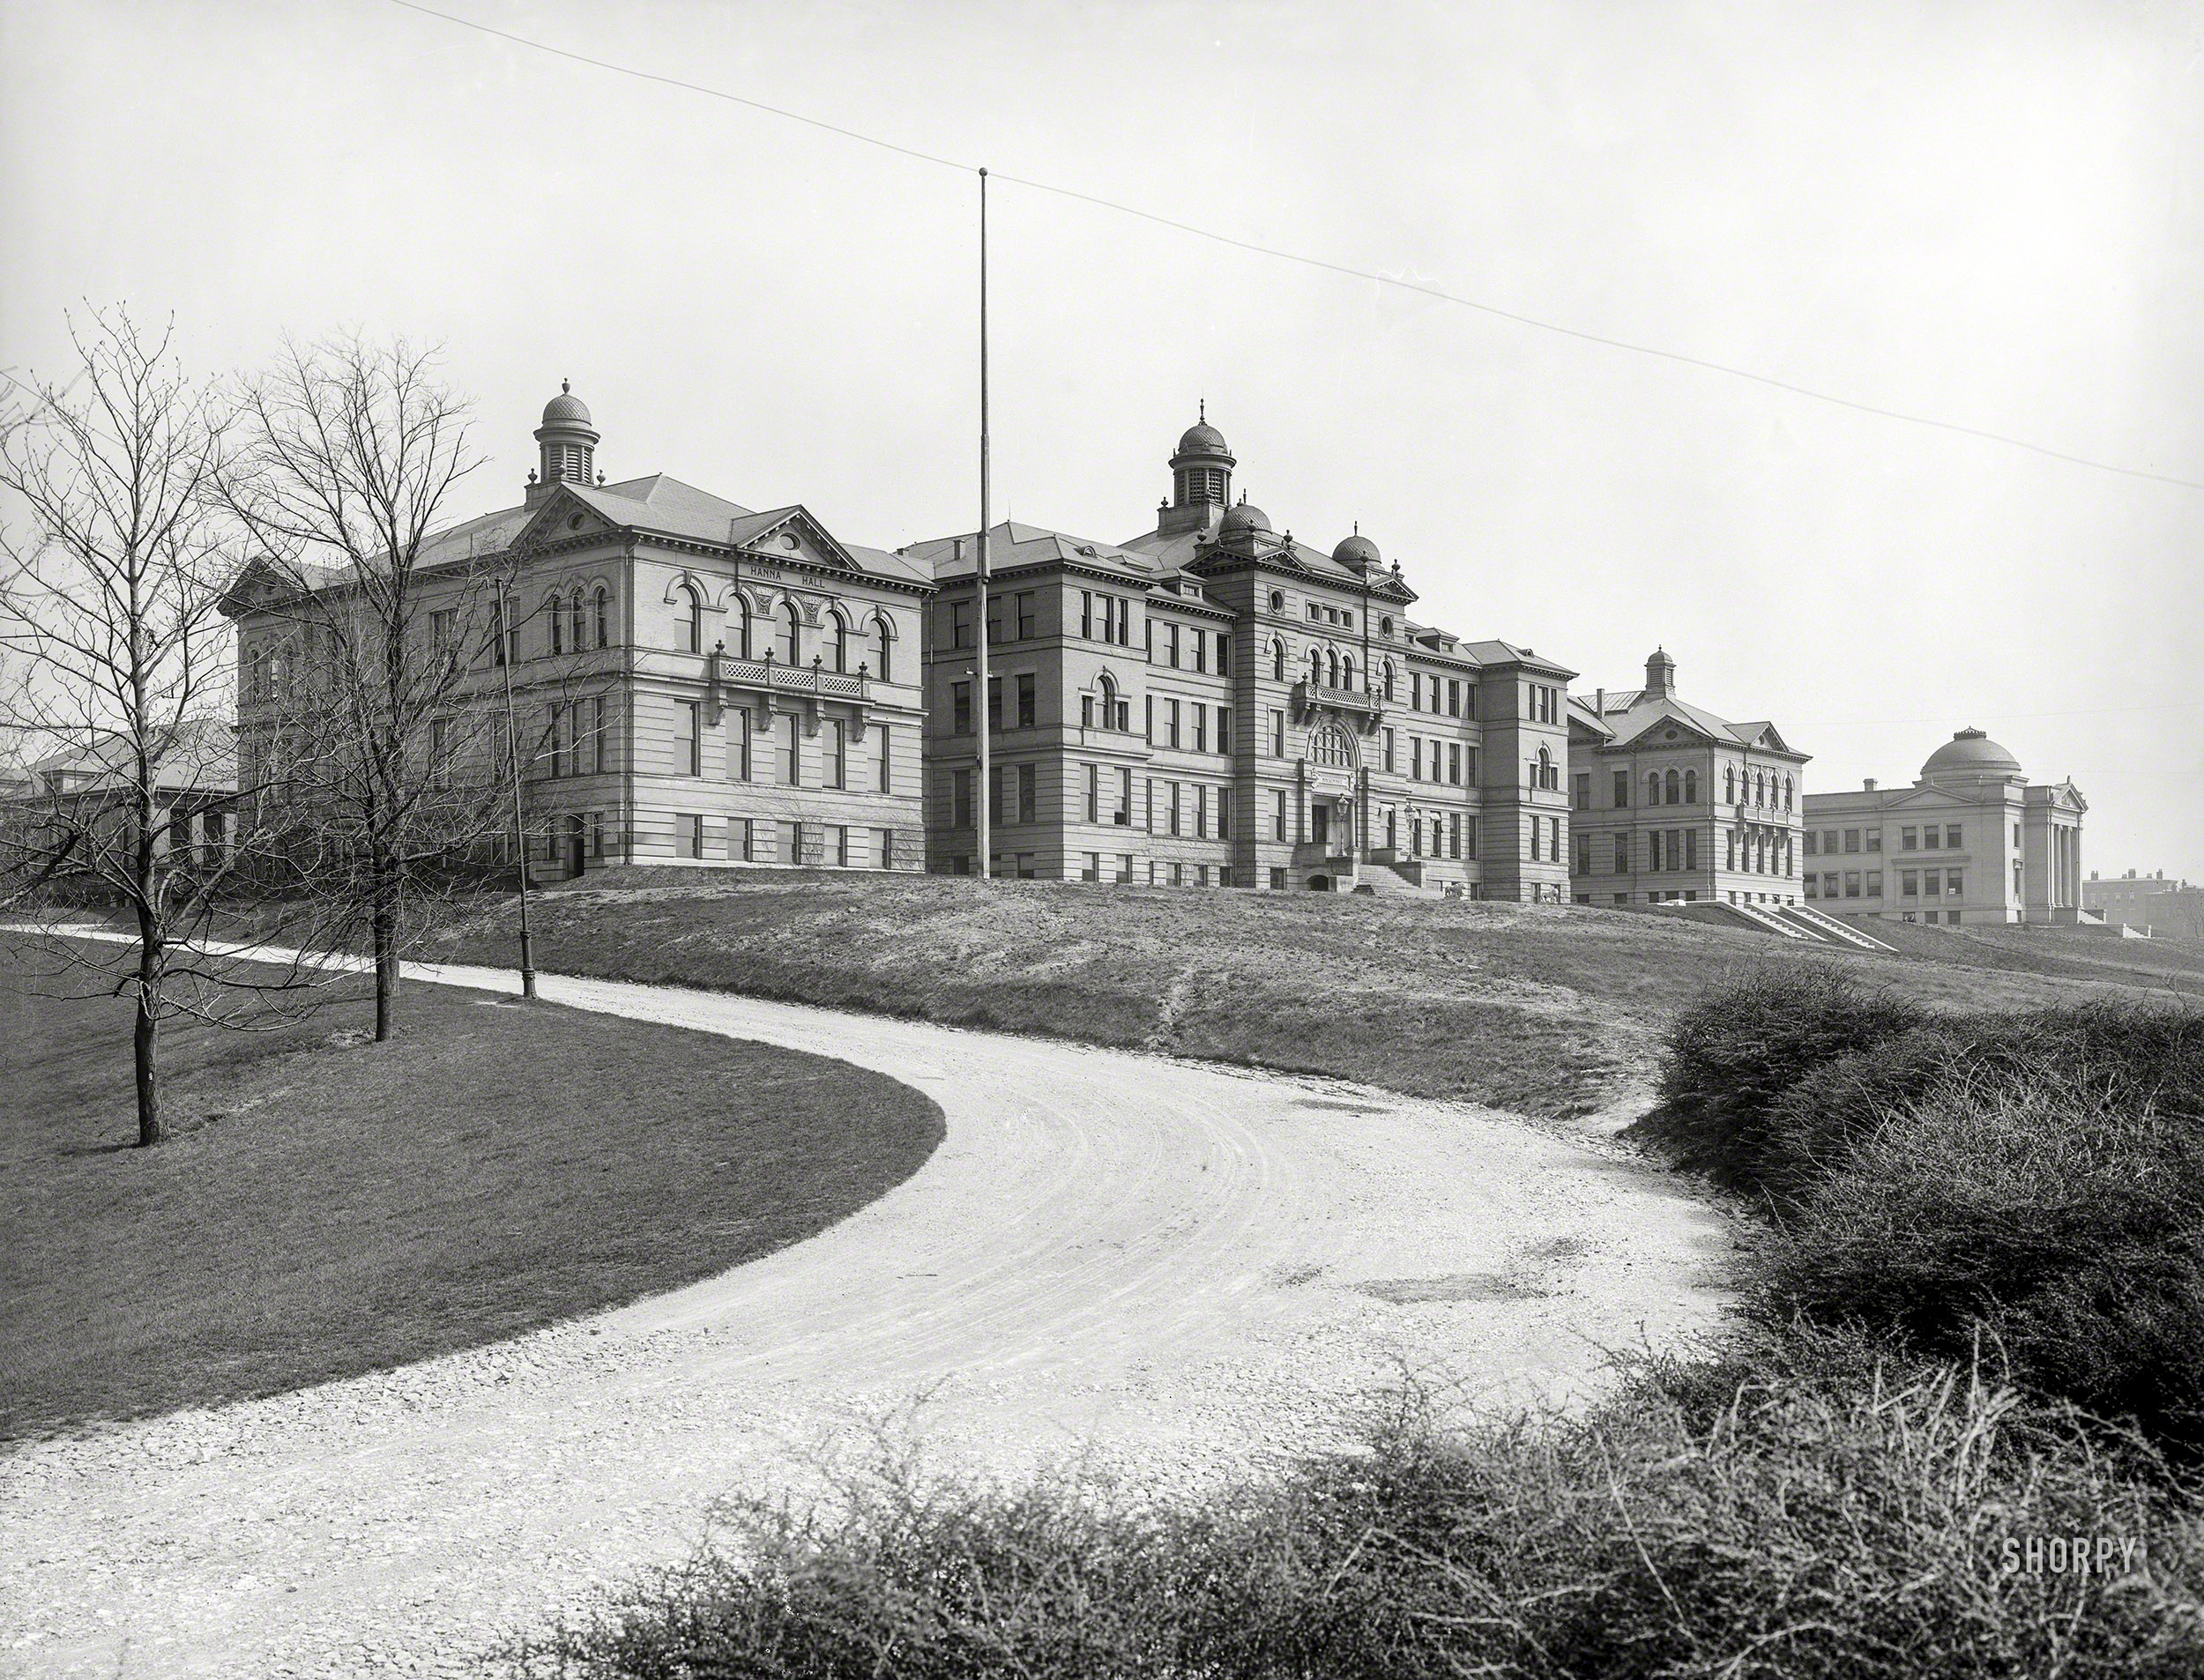 Cincinnati, Ohio, circa 1904. "University of Cincinnati." McMicken Hall, flanked by his siblings Hanna Hall and Cunningham Hall. 8x10 inch dry plate glass negative. View full size.